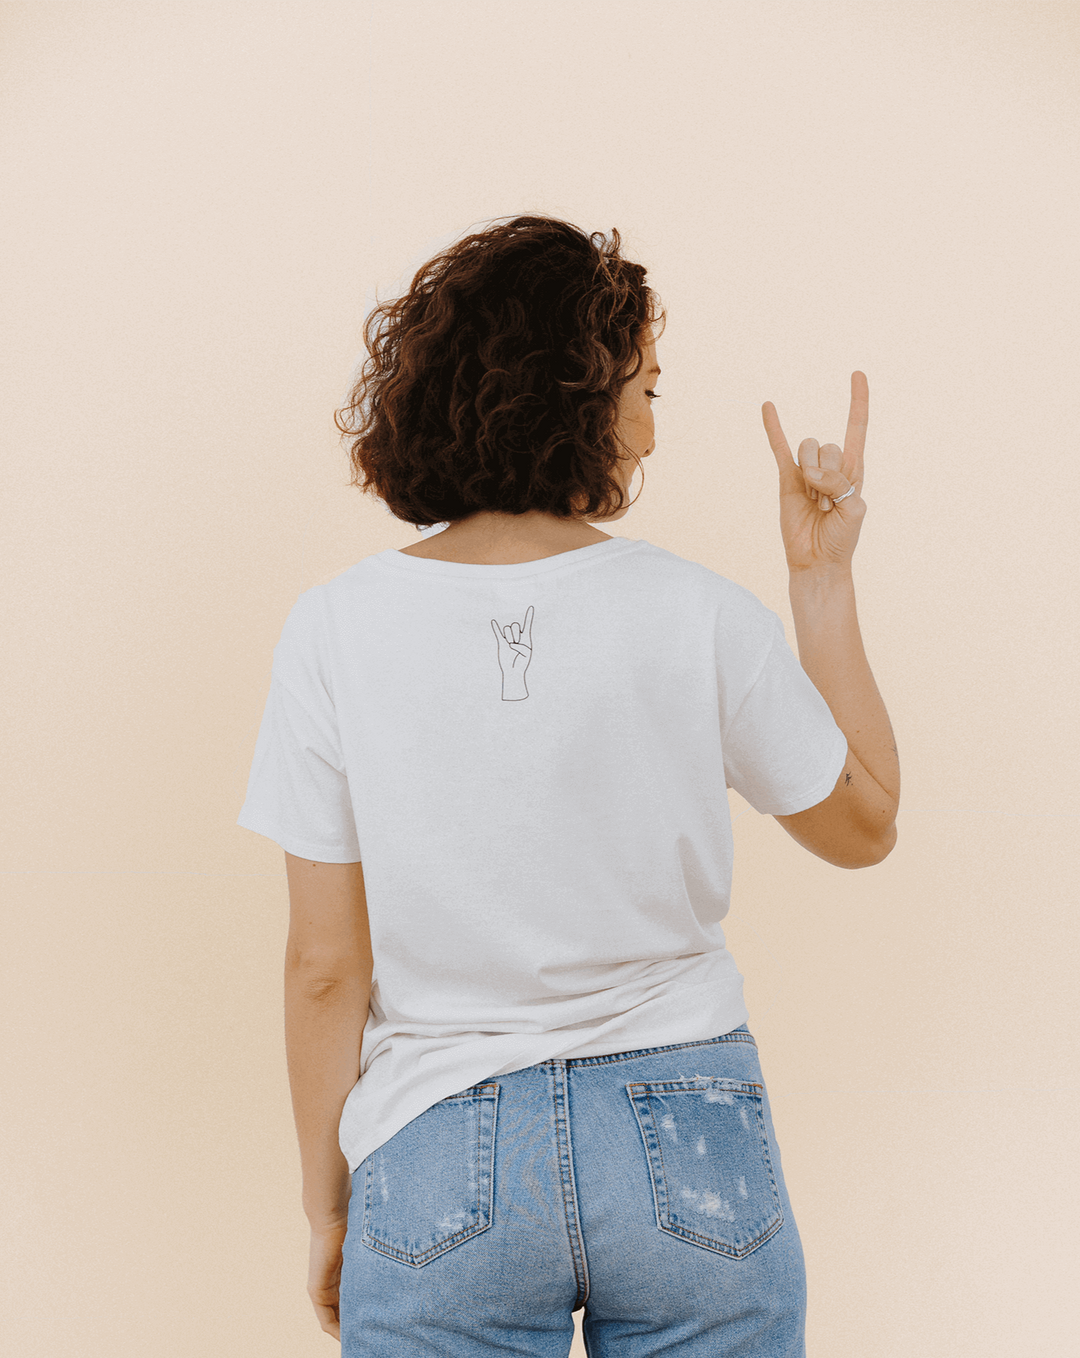 Rock On T-Shirt (off white)